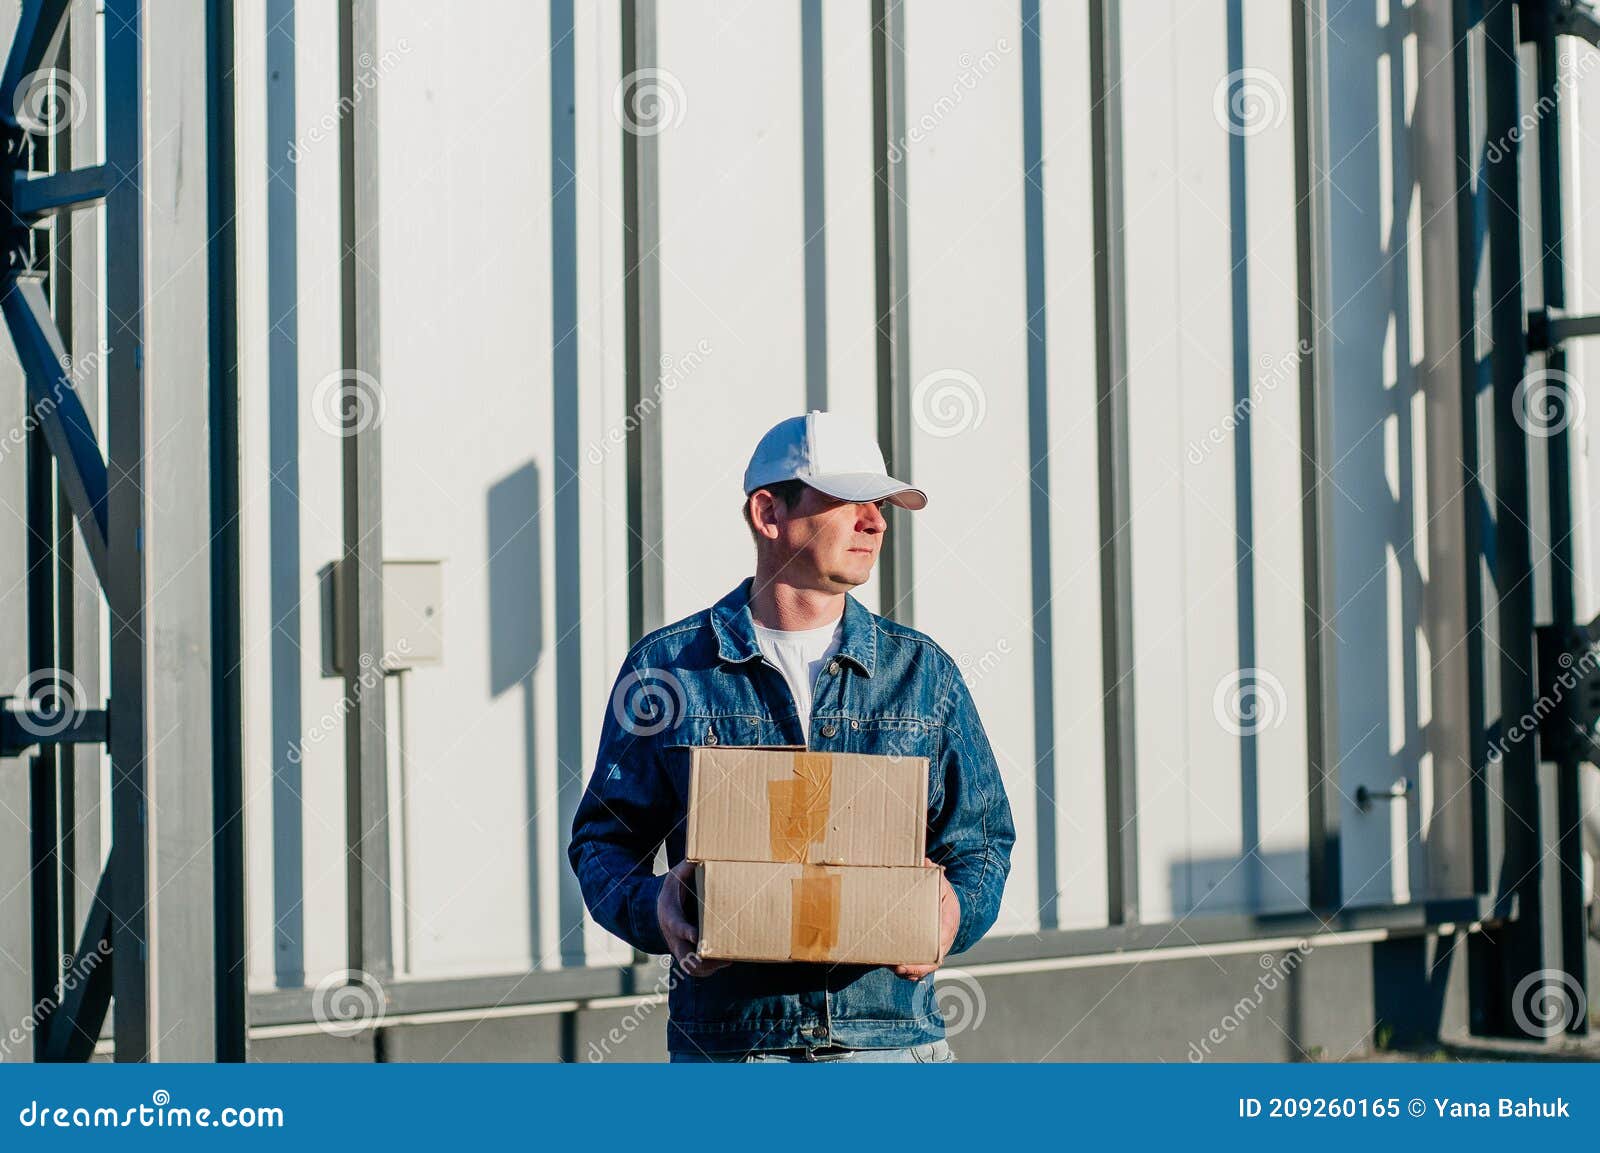 male courier in the blue costume and a cap taking out mail carton boxes from the white van on the sunny day in the street. outdoor